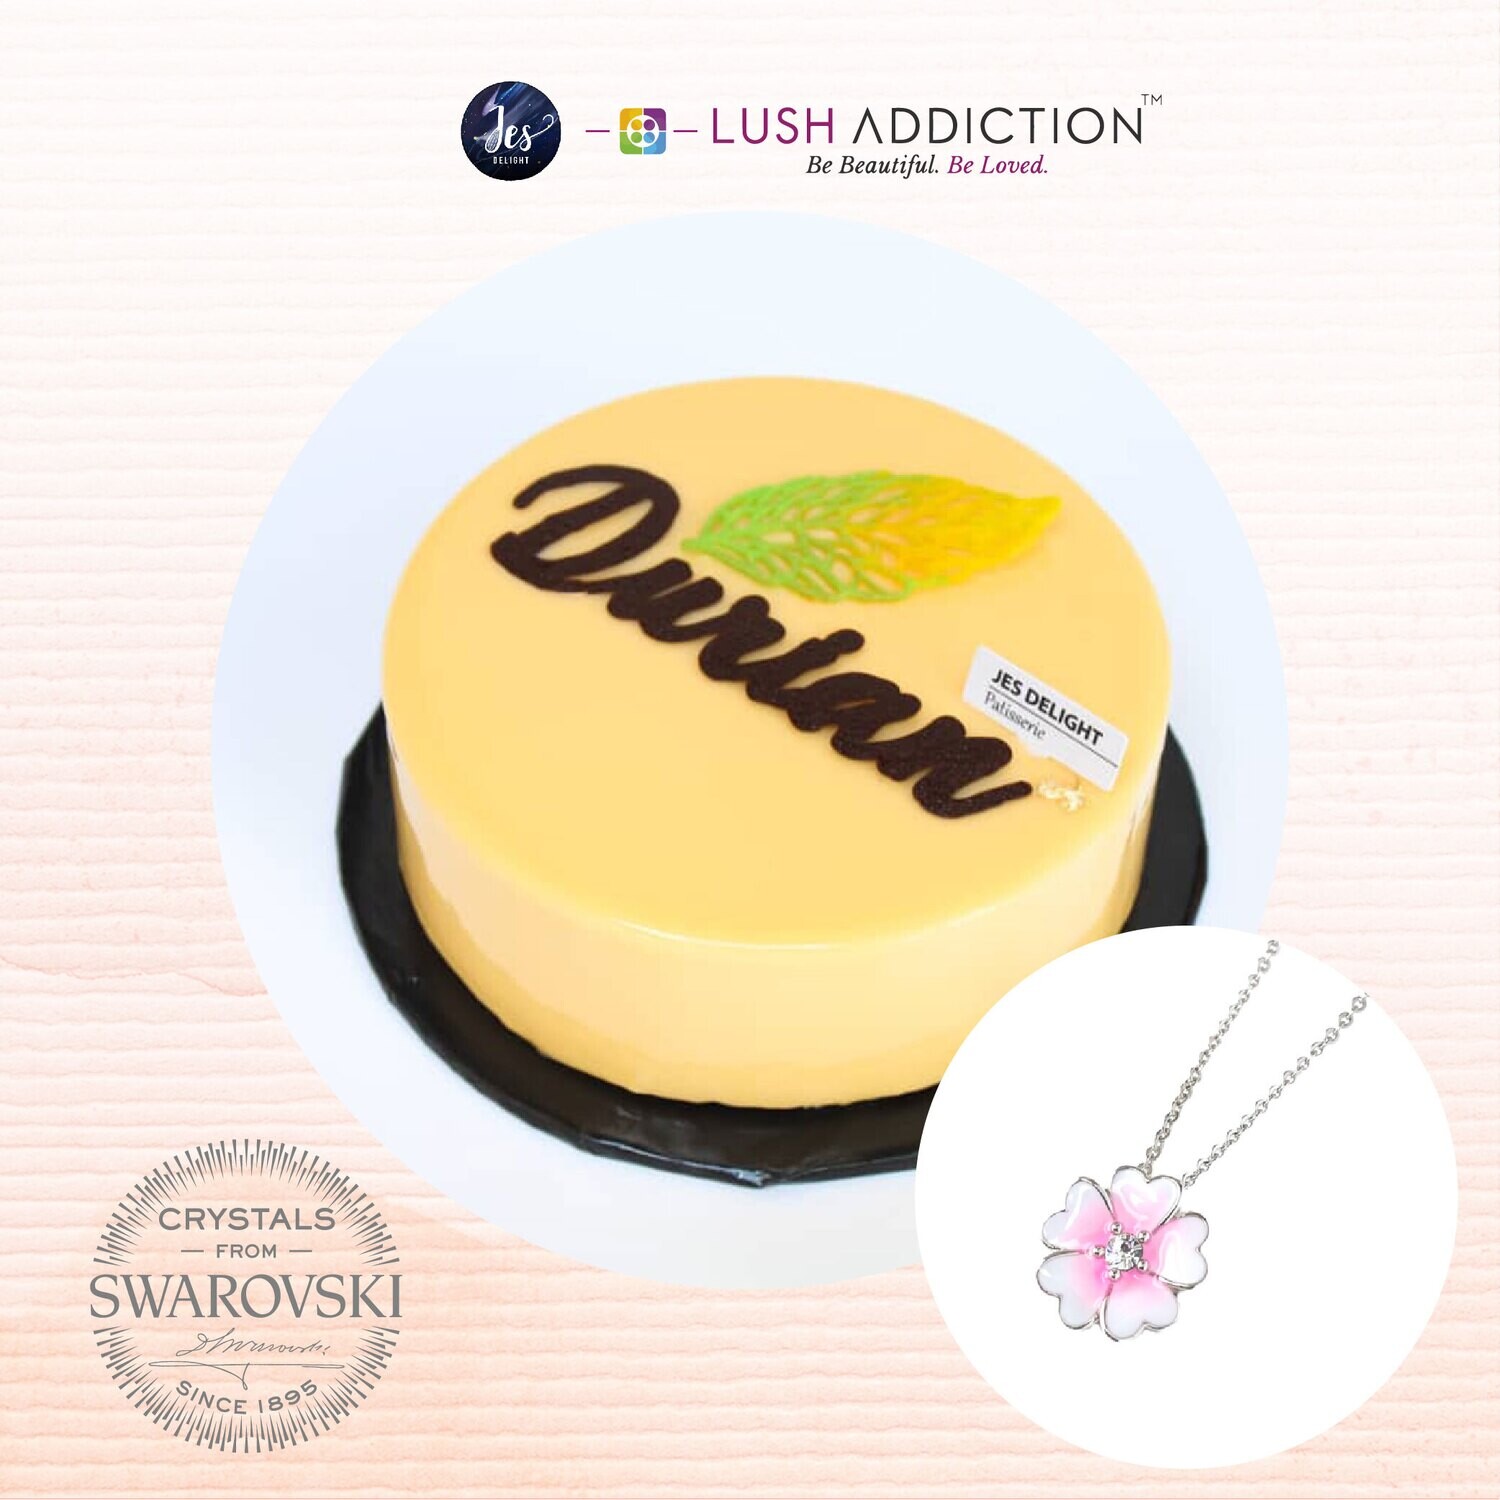 Durian Cake + Lush Primrose Necklace Bundle Deal (By: JES Delight from JB)